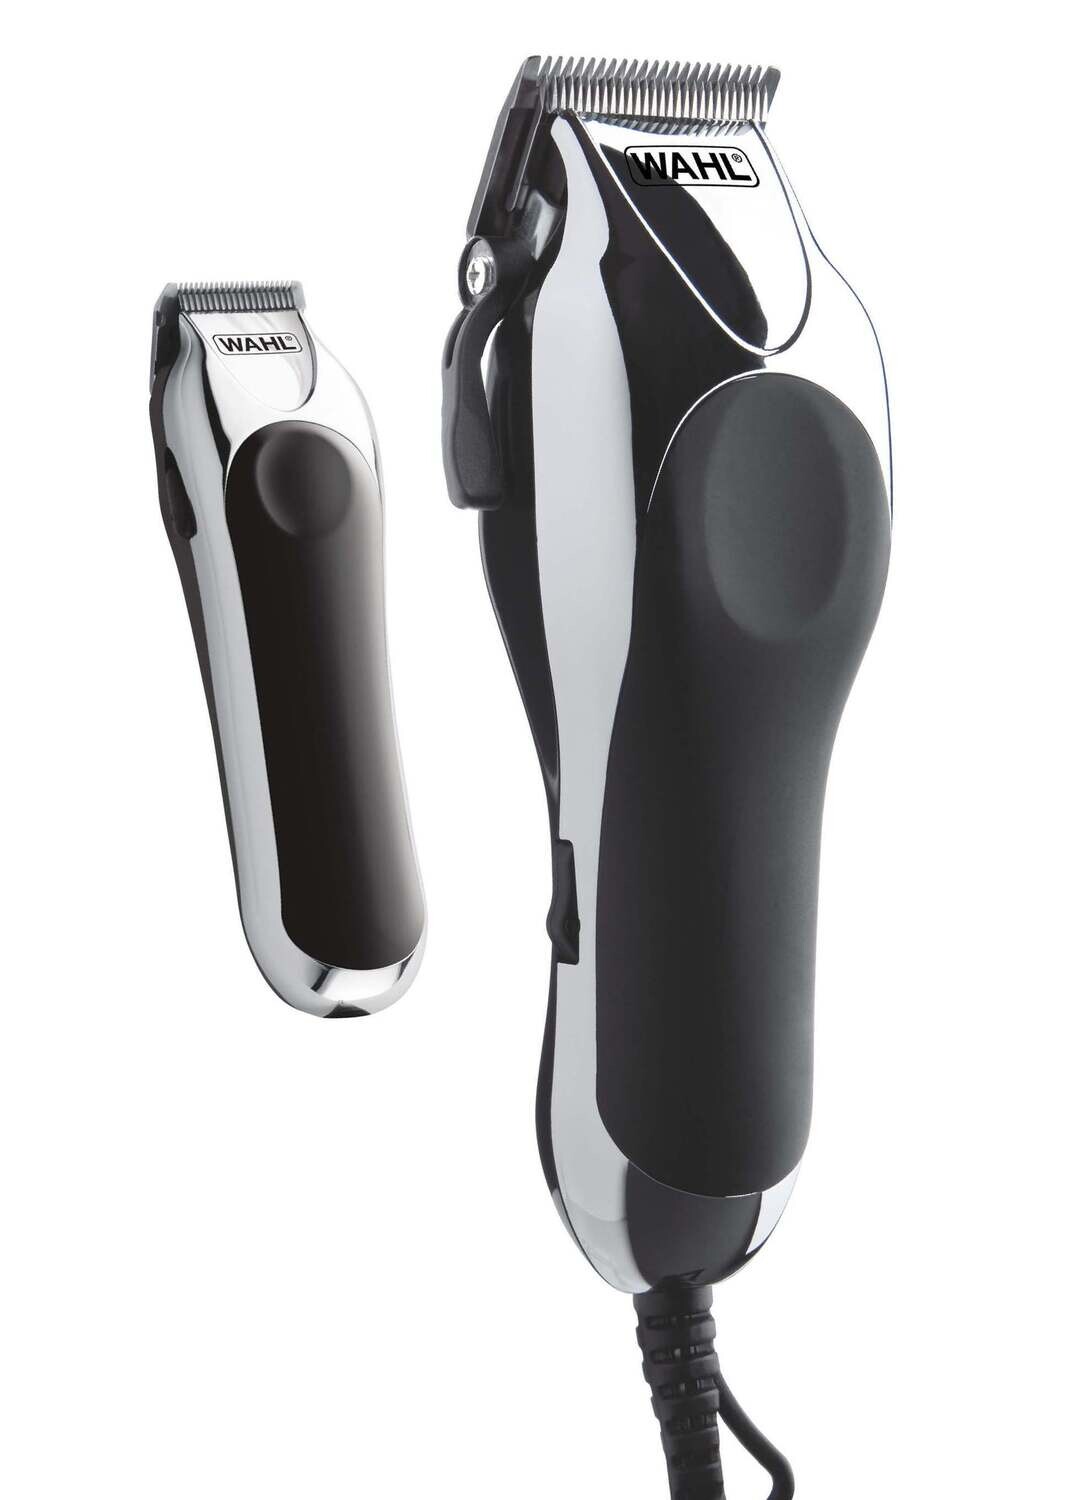 WAHL chrome pro deluxe Corded hair clipper with mini trimmer 79524